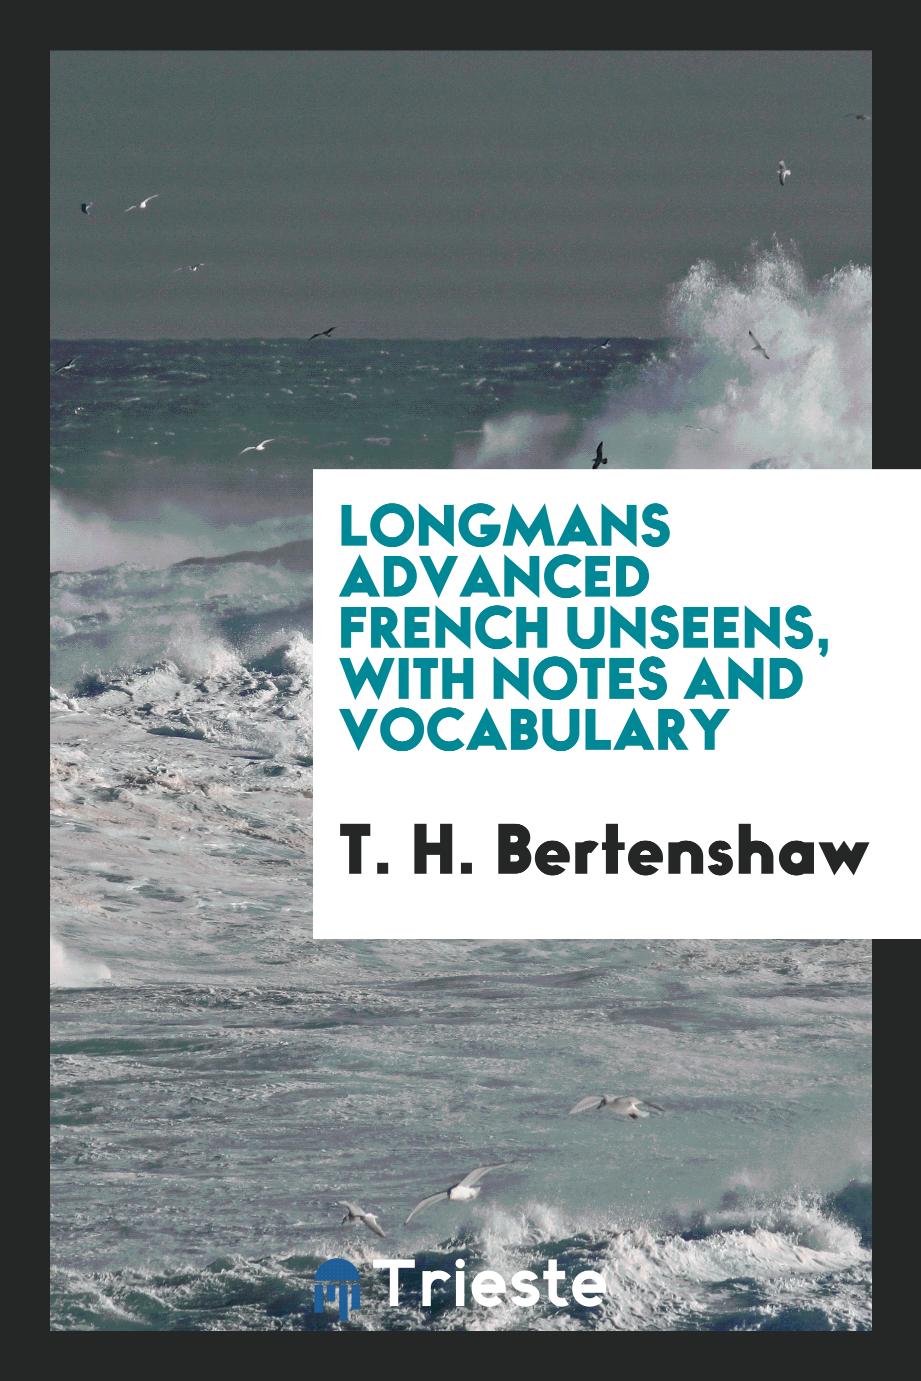 Longmans advanced French unseens, with notes and vocabulary